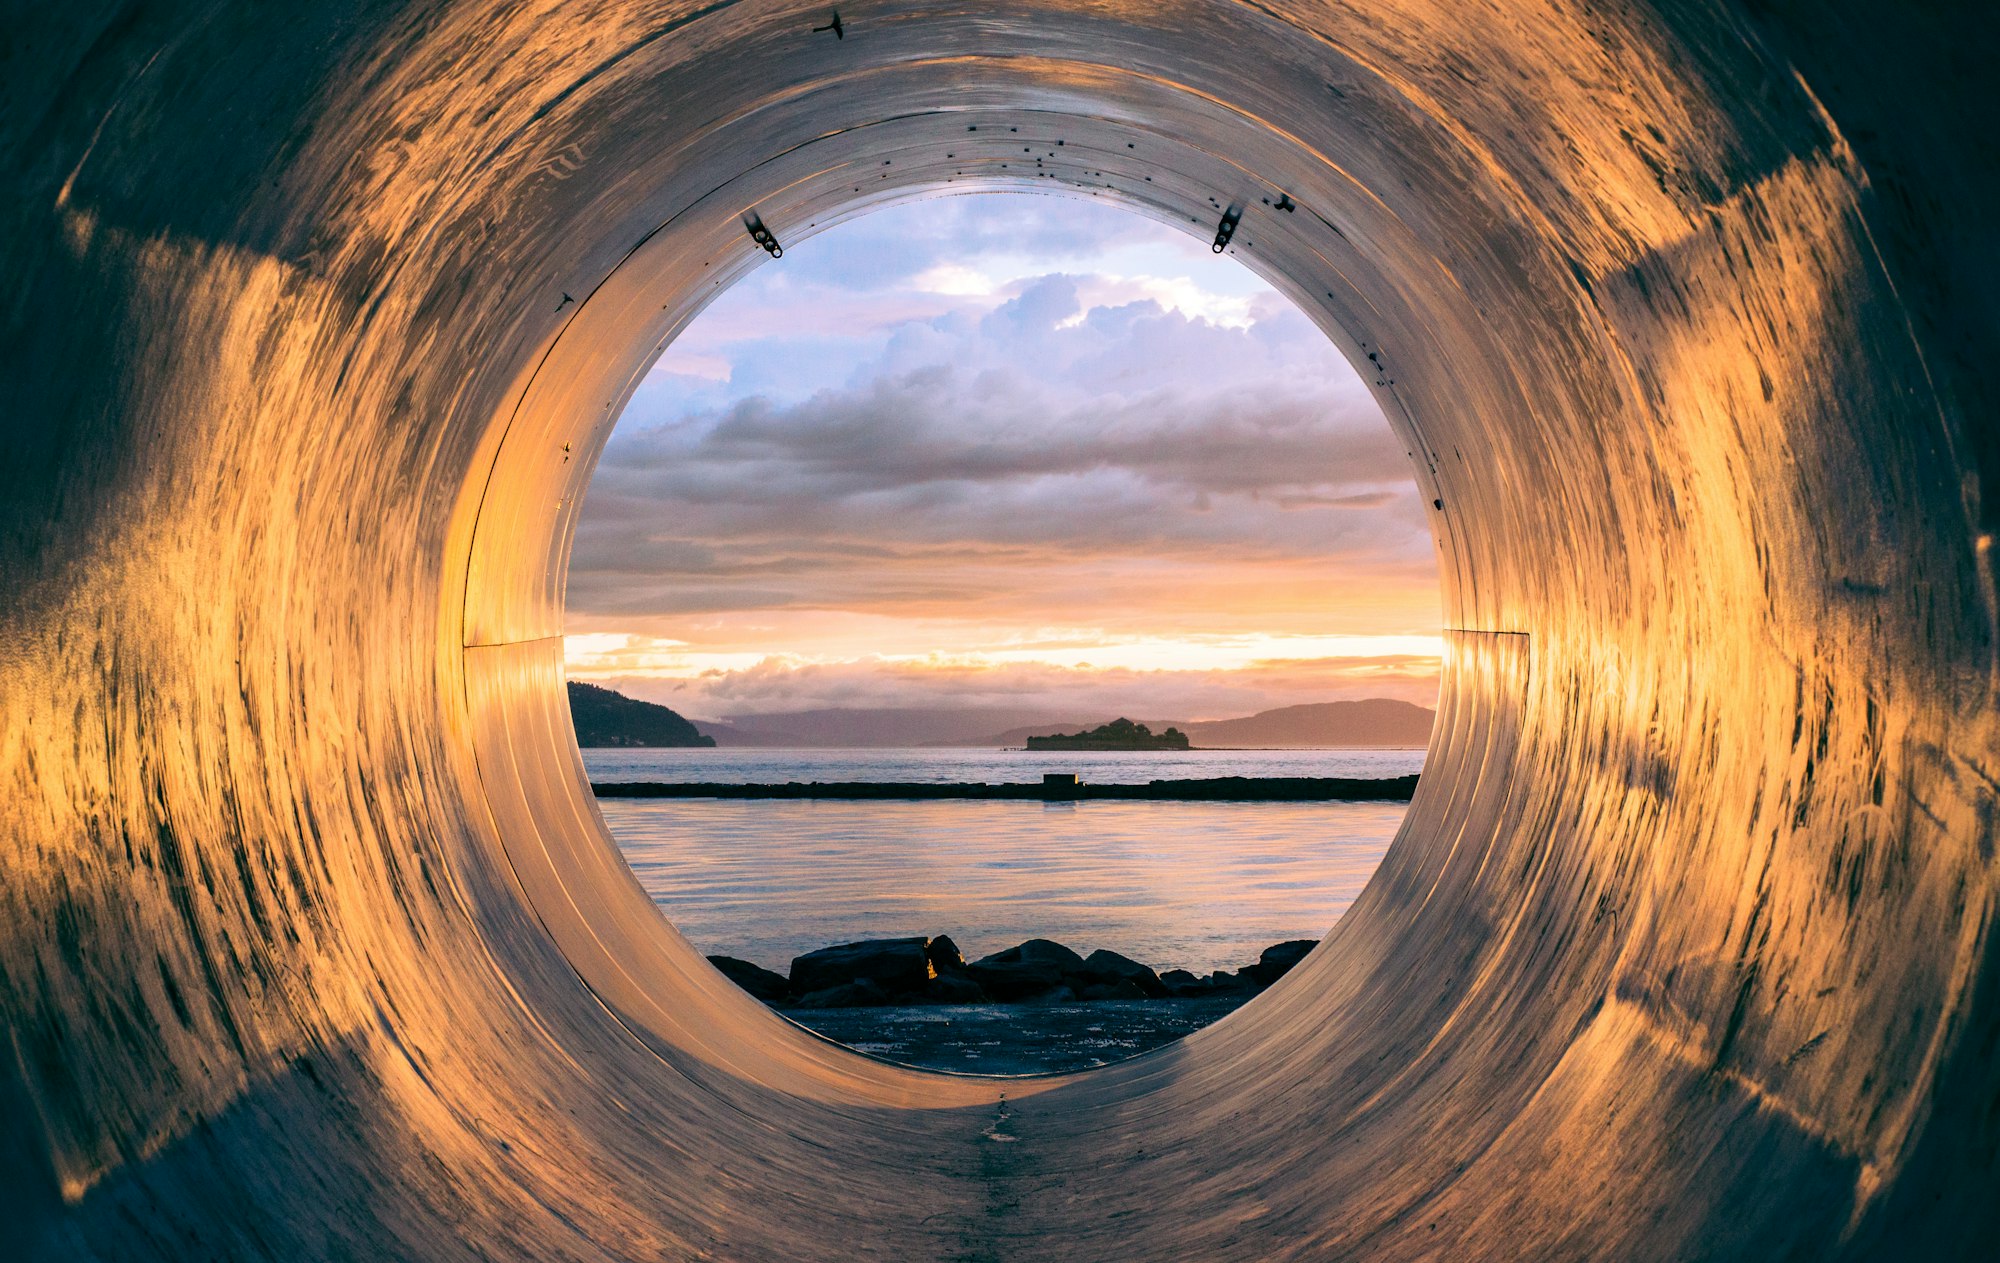 Circular tube leading into a body of water